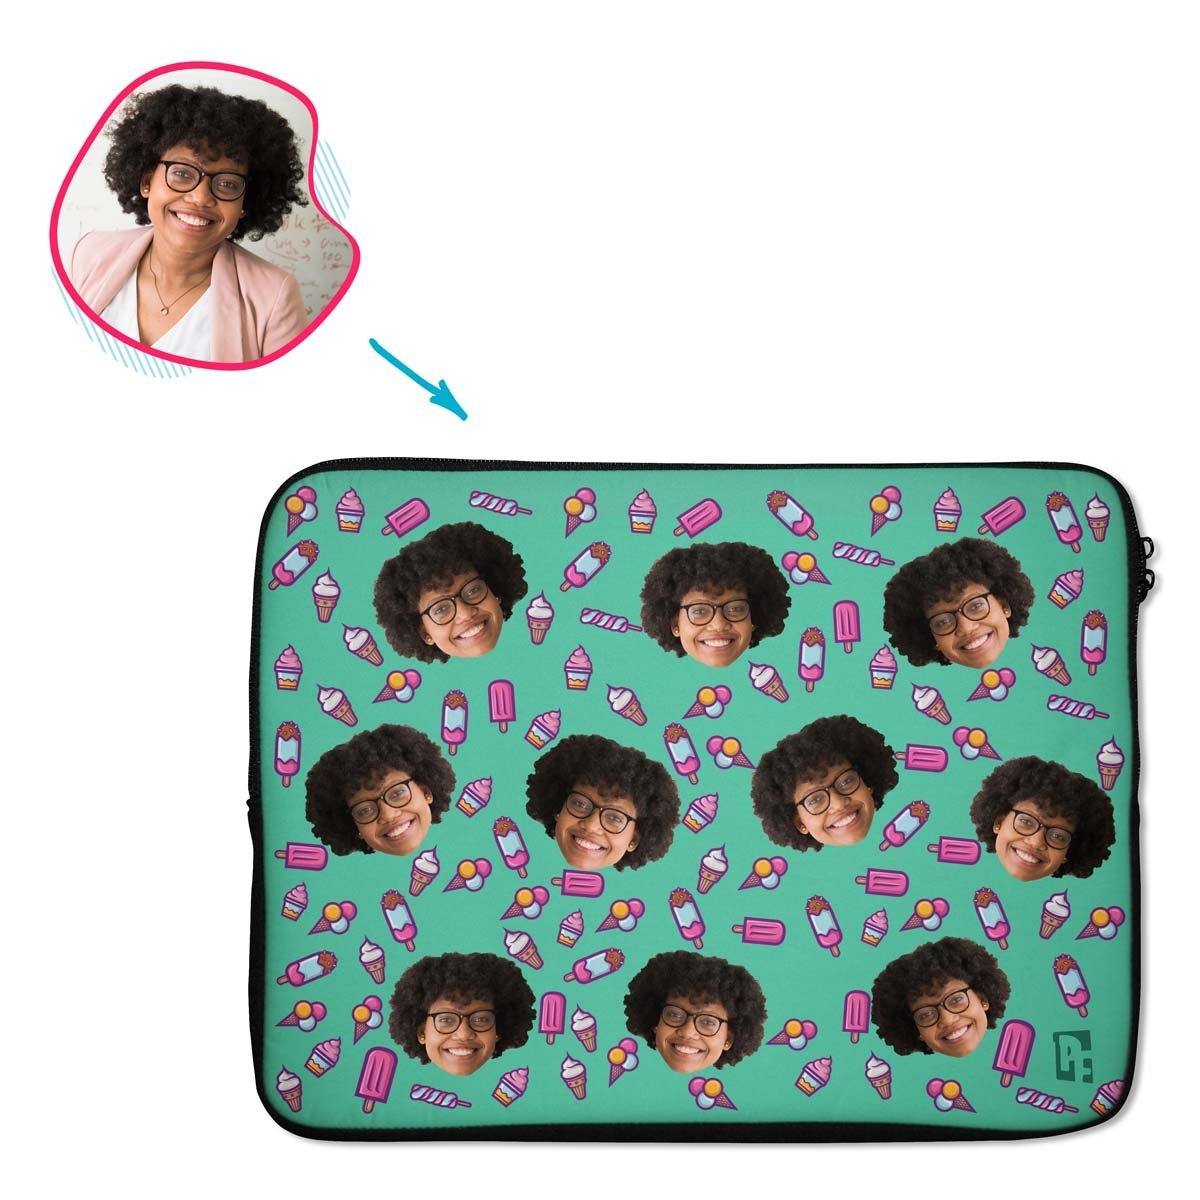 Candies Personalized Laptop Sleeve